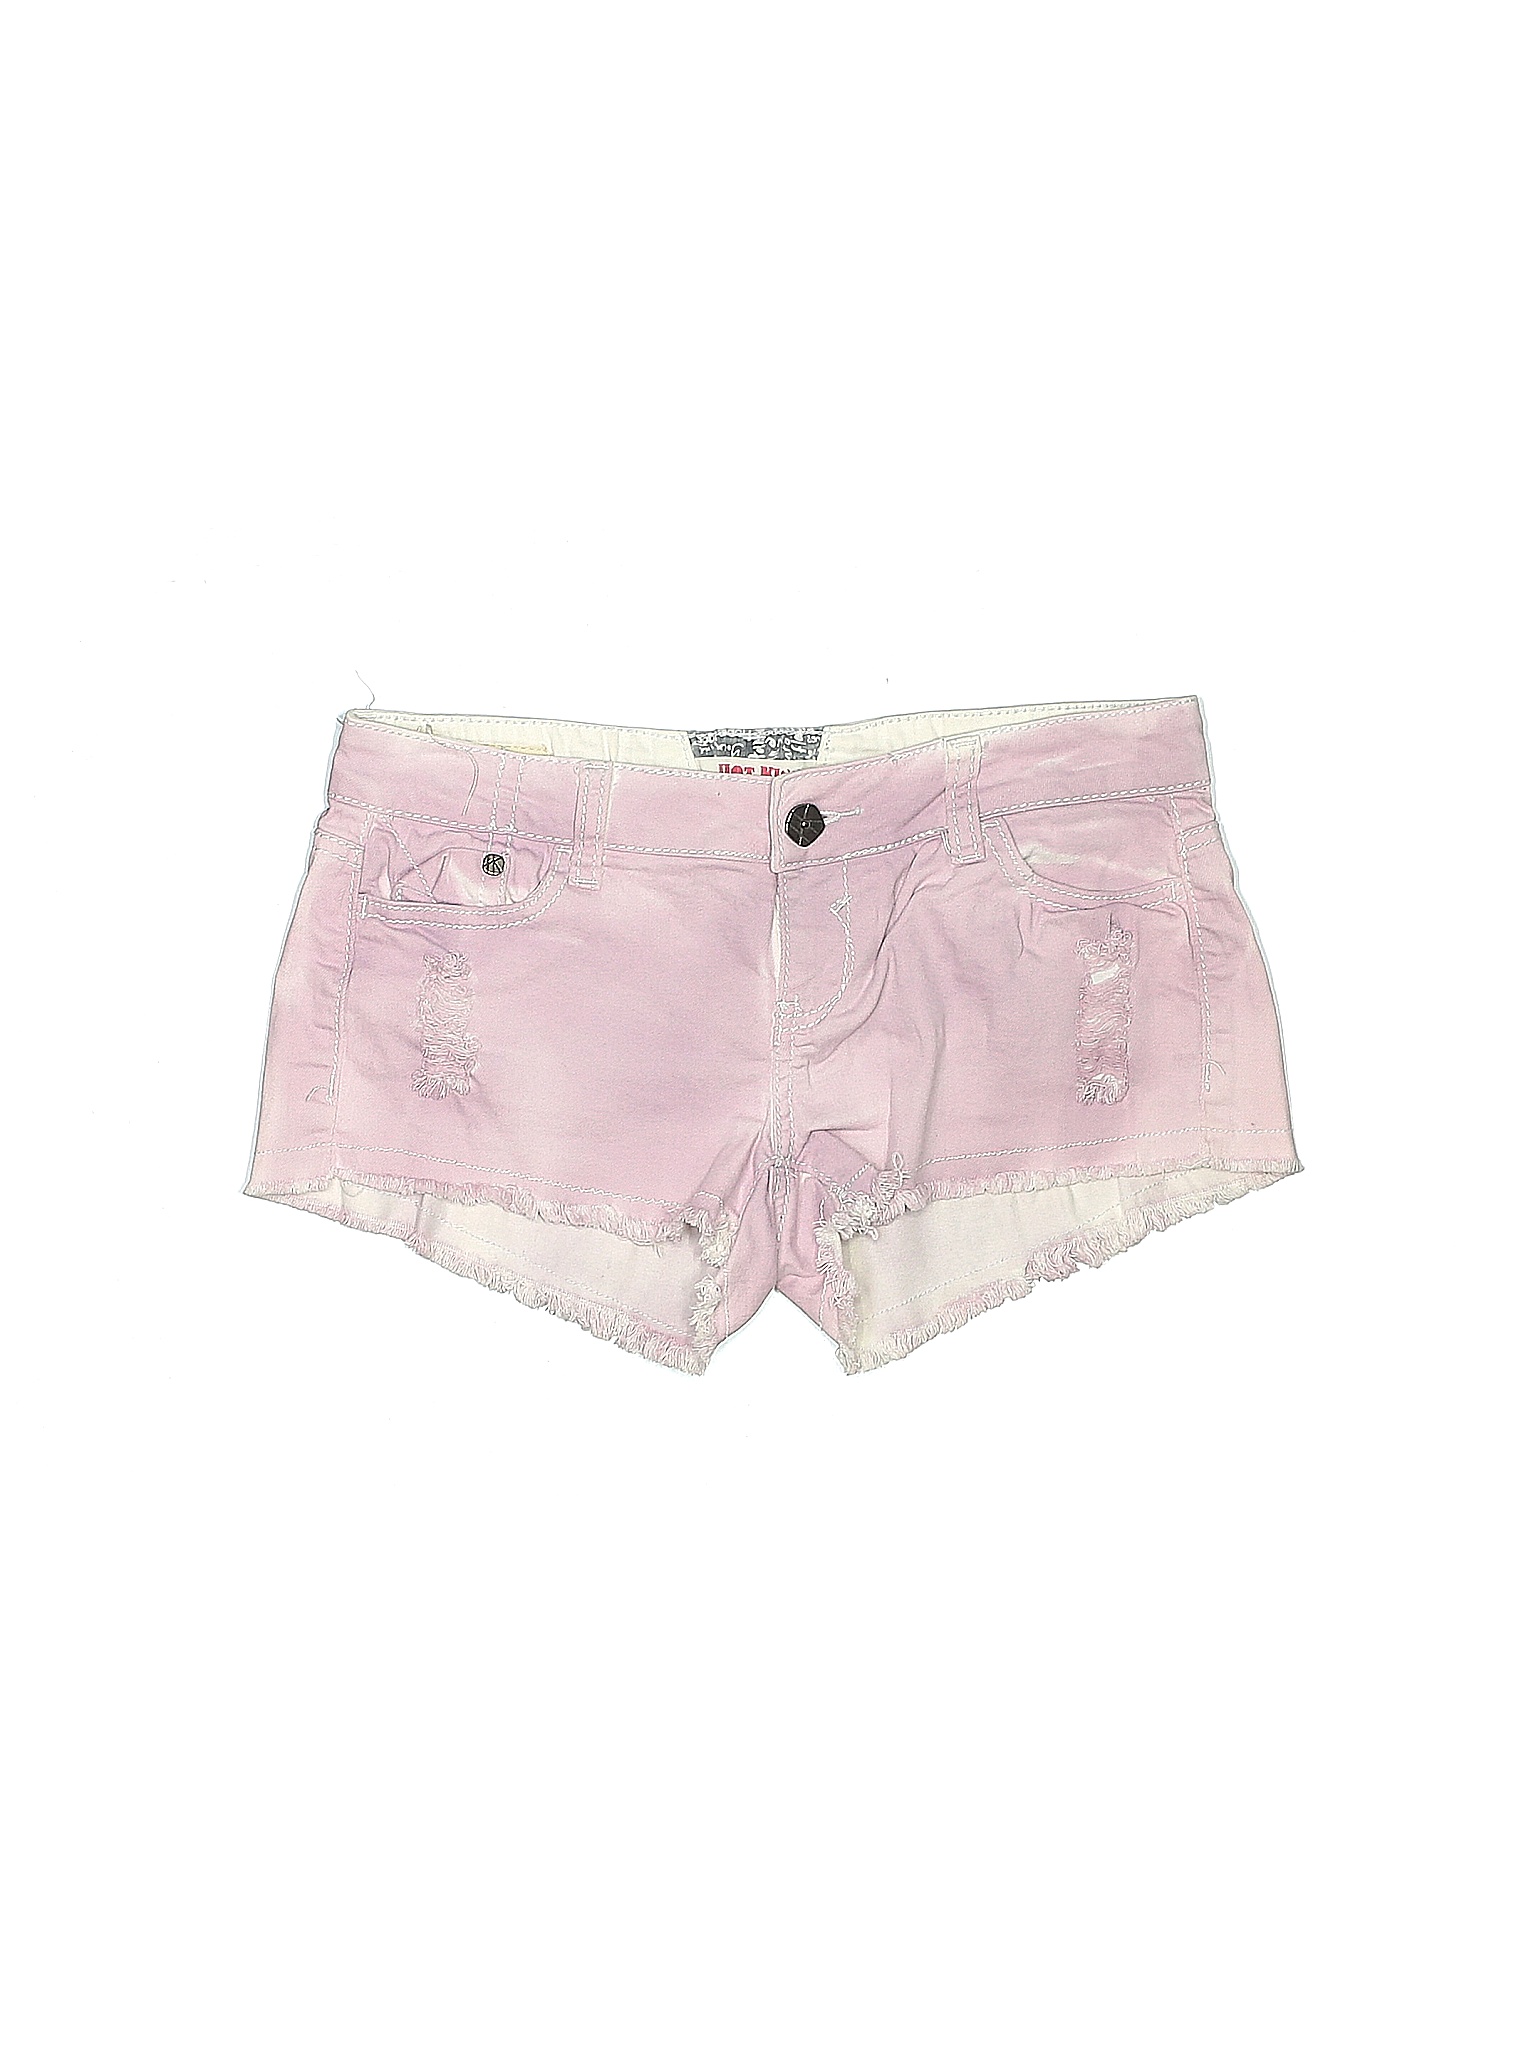 Hot Kiss Juniors Shorts On Sale Up To 90% Off Retail | thredUP